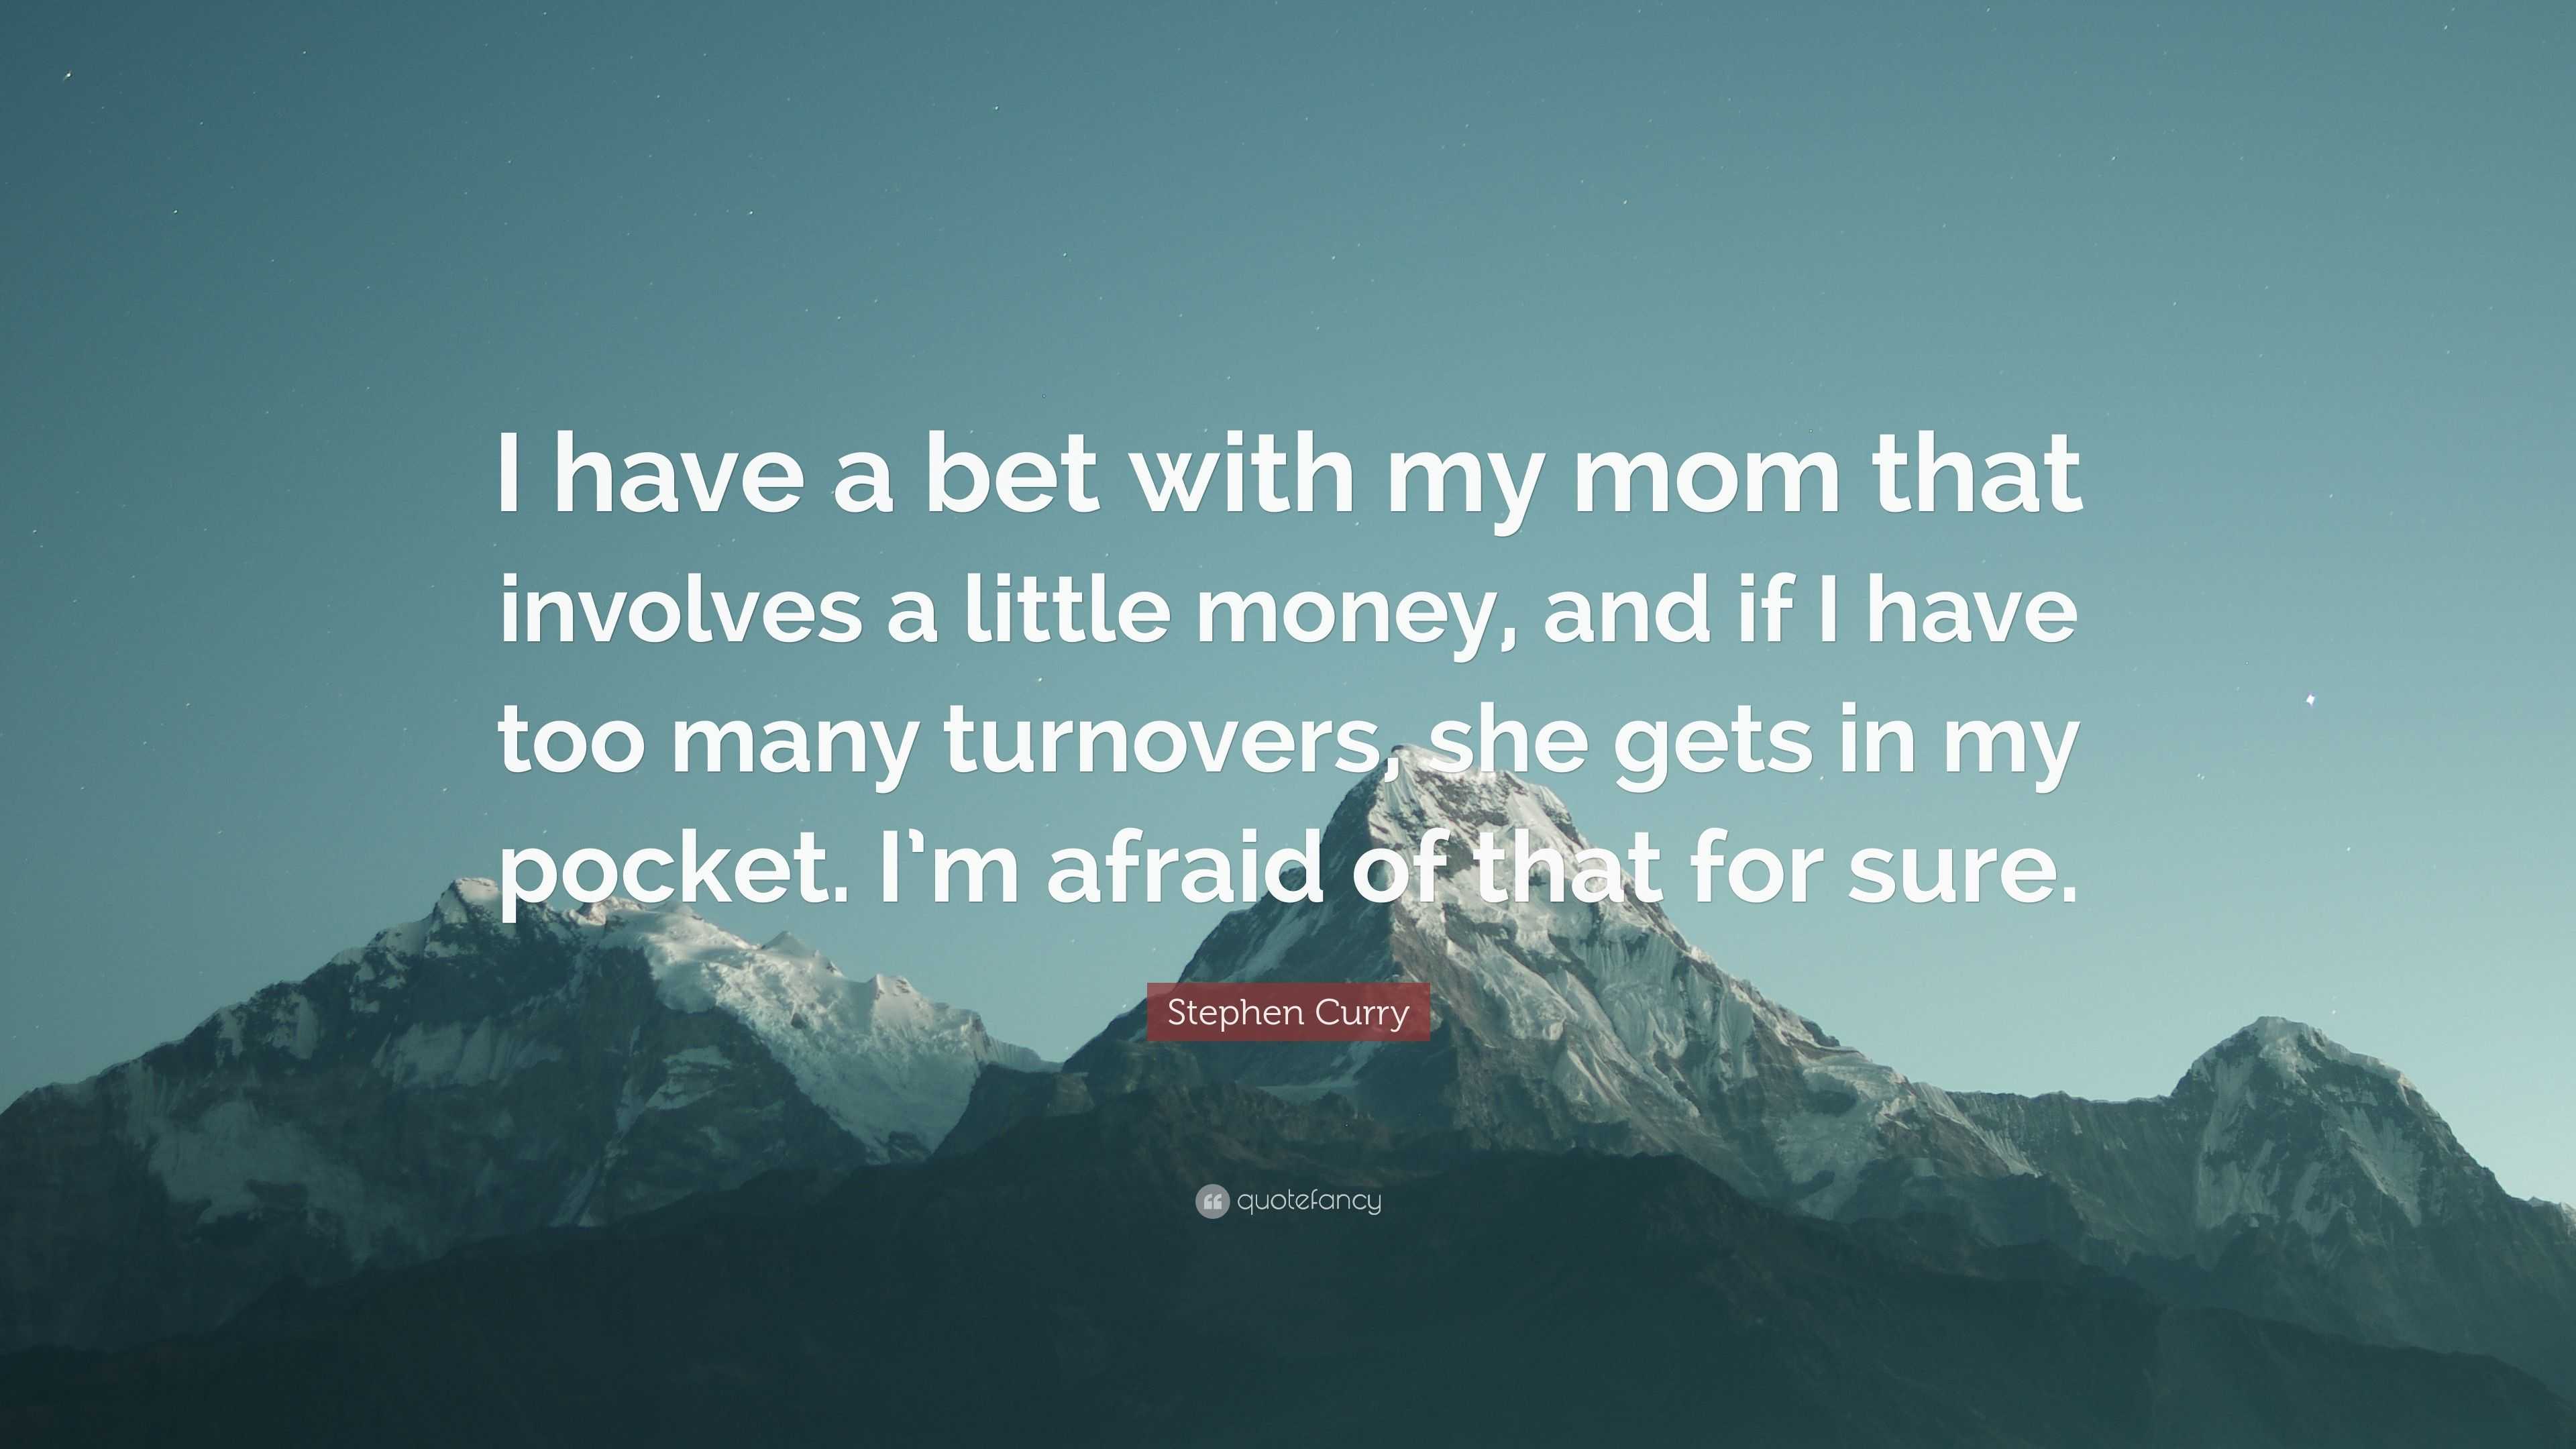 Stephen Curry Quote: “I have a bet with my mom that involves a little  money, and if I have too many turnovers, she gets in my pocket. I'm afra...”